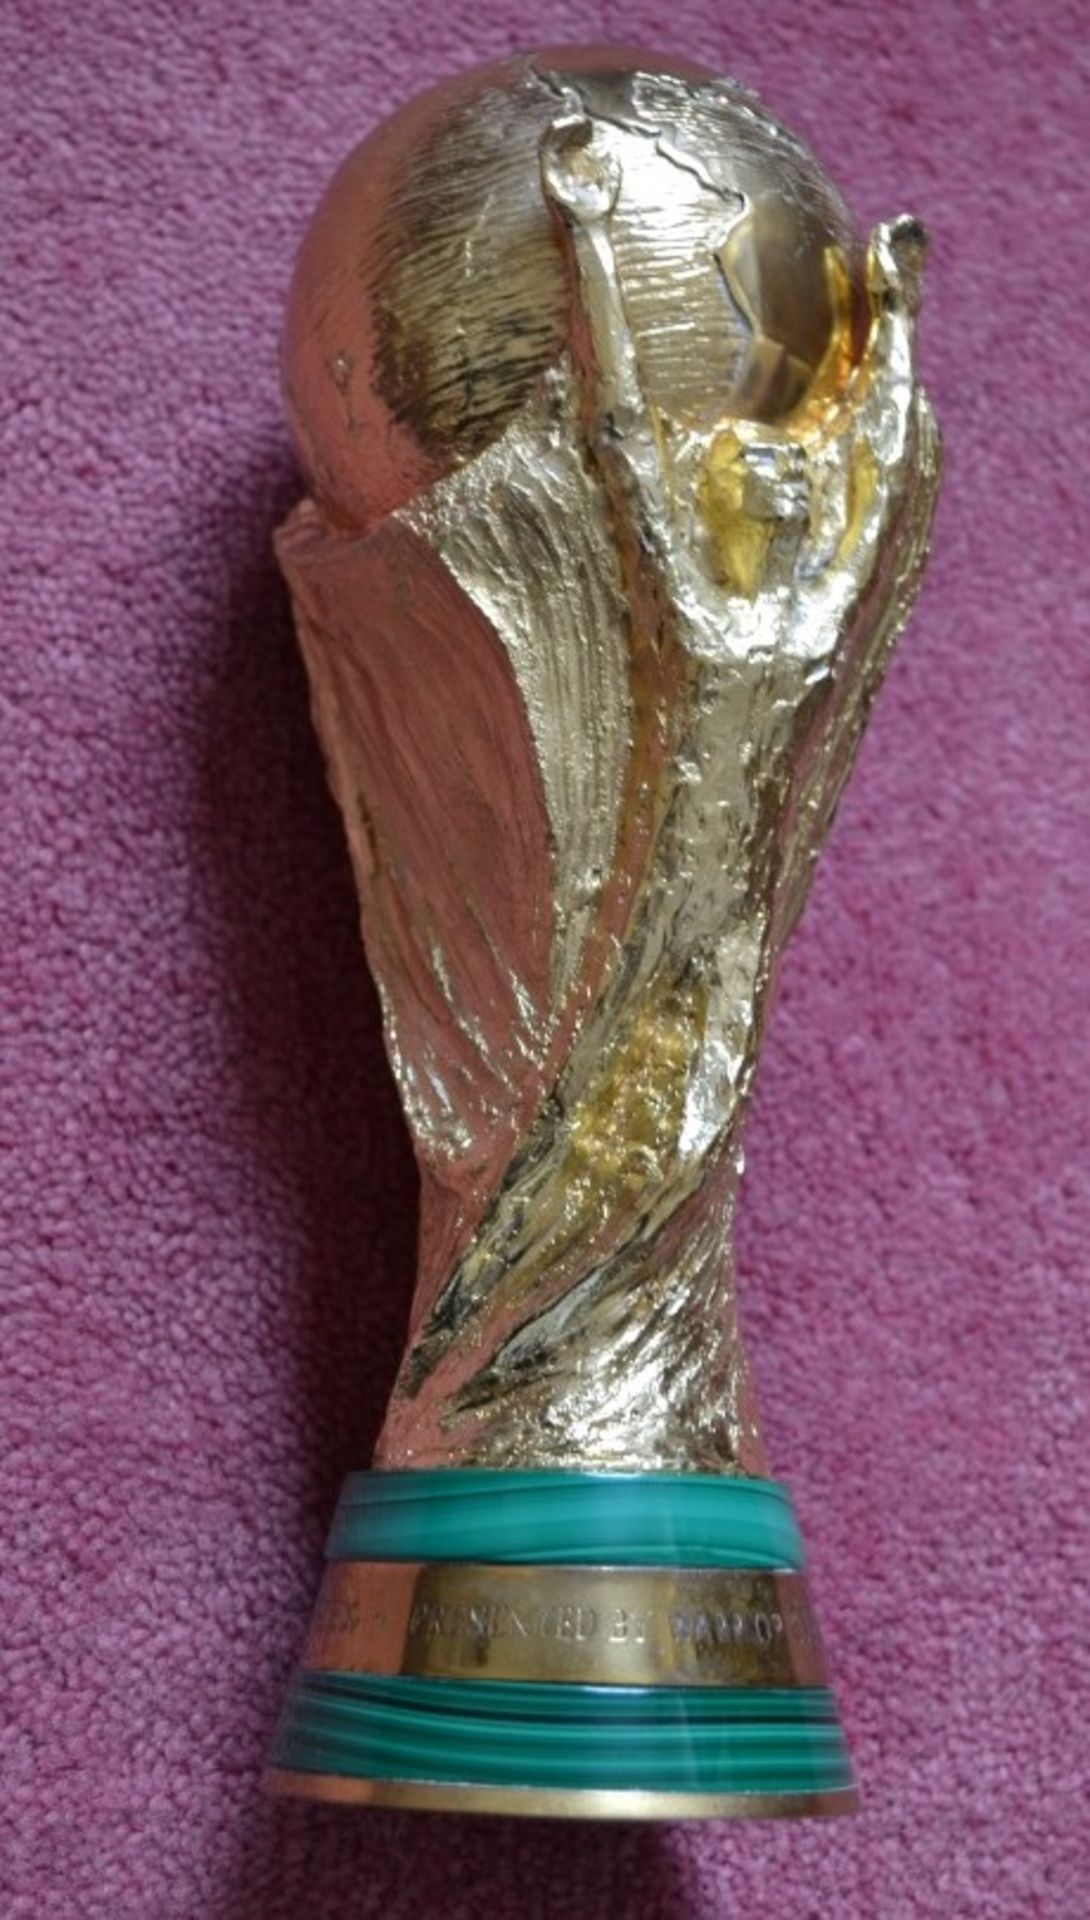 1 x Official World Cup 1:1.3 Scale 27cm Replica By Gerrard & Co. - Gold Plated - No.8 Of Only 10 - Image 7 of 16